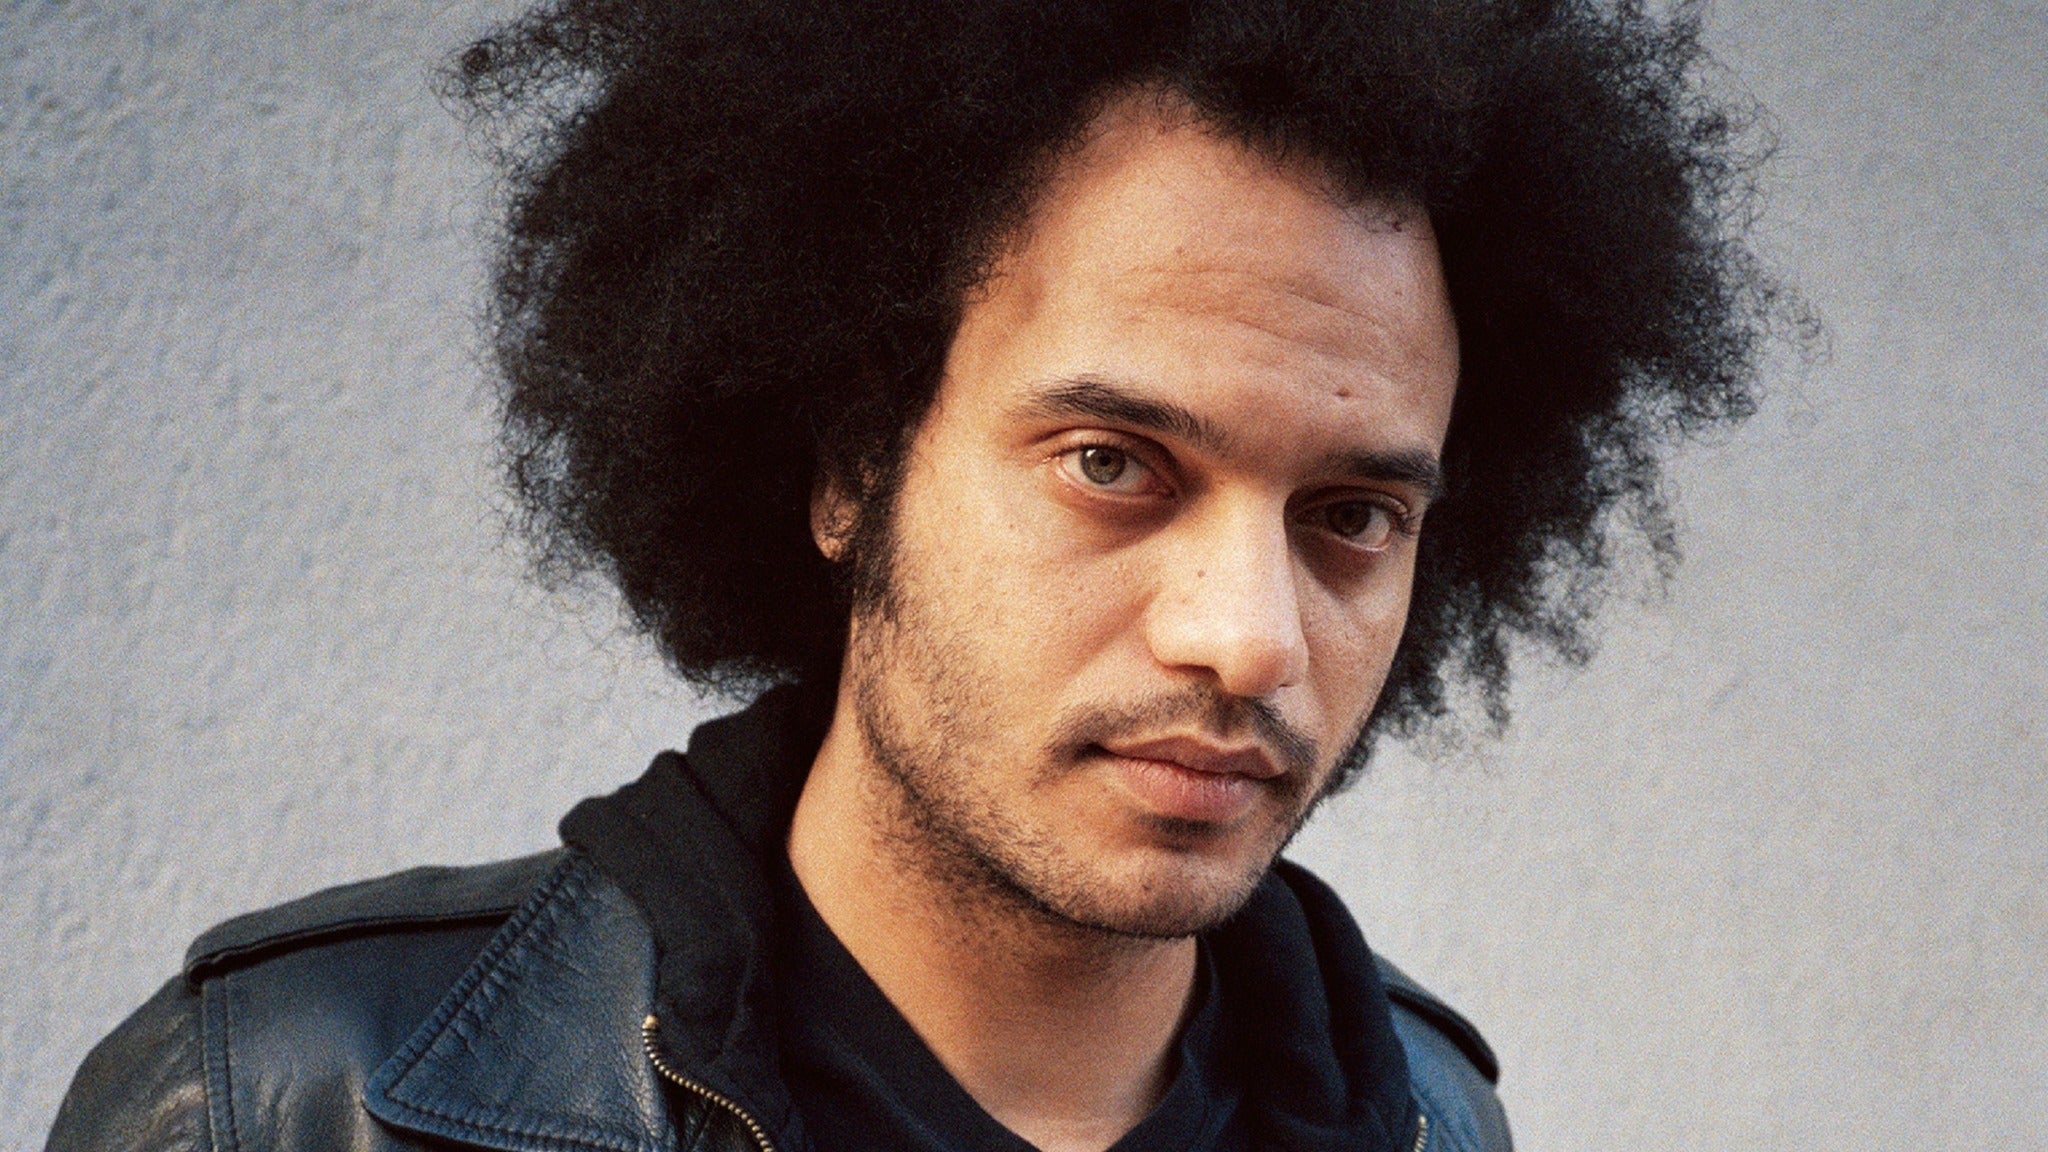 Zeal & Ardor with special guests at Brick by Brick